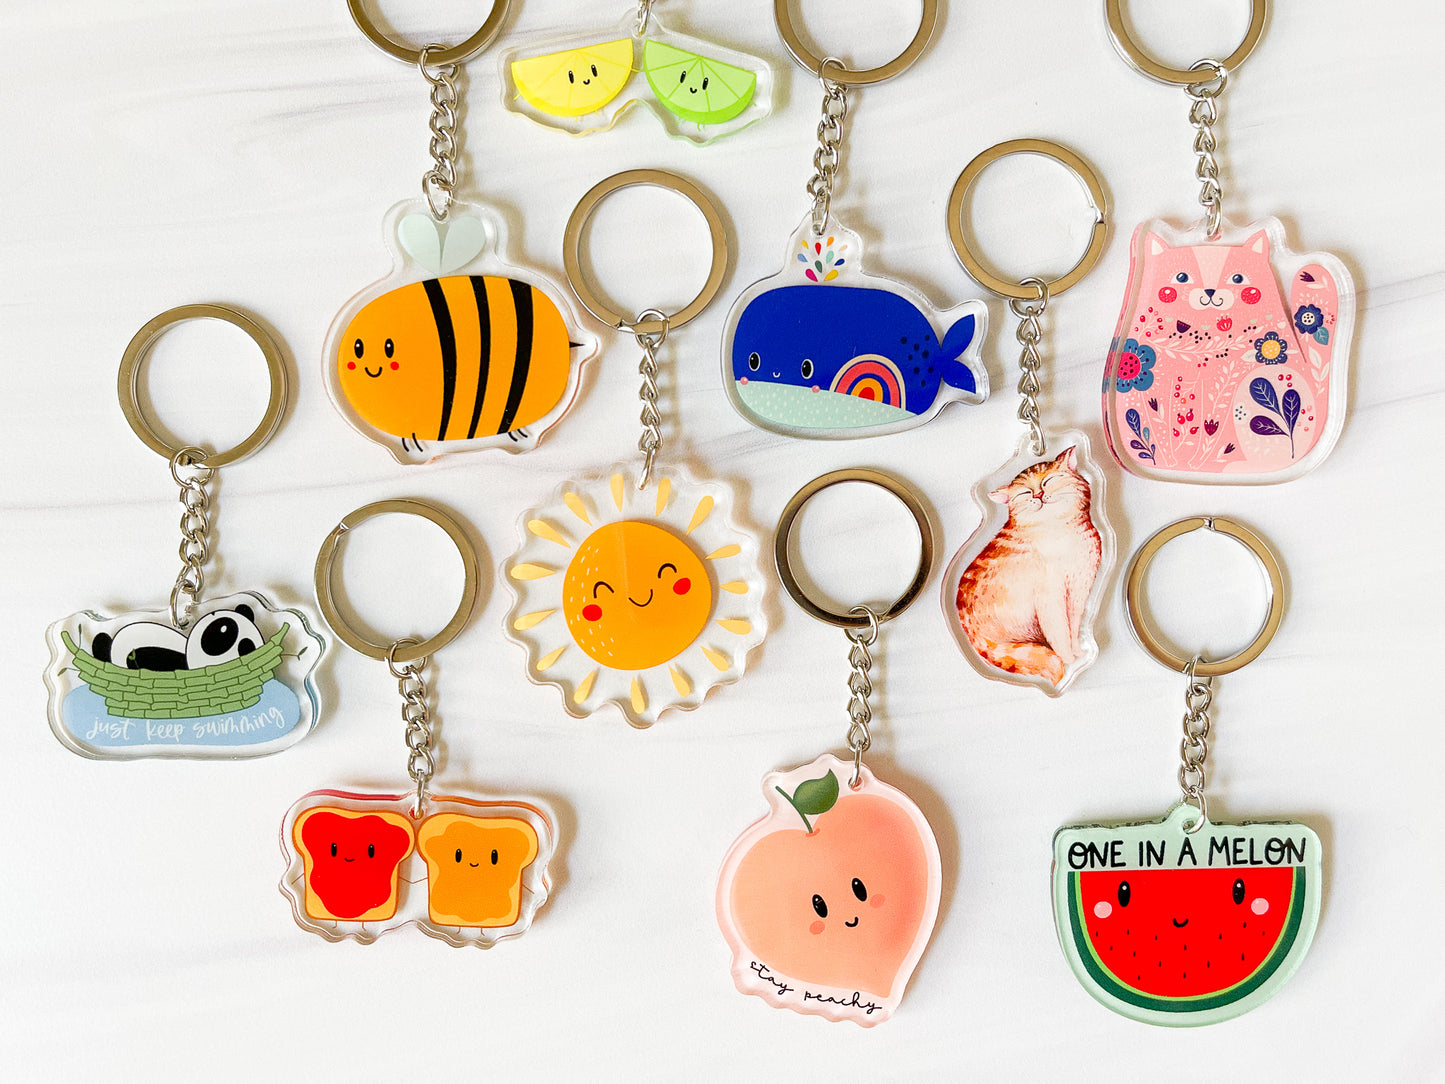 Peanut Butter and Jelly Acrylic Keychain